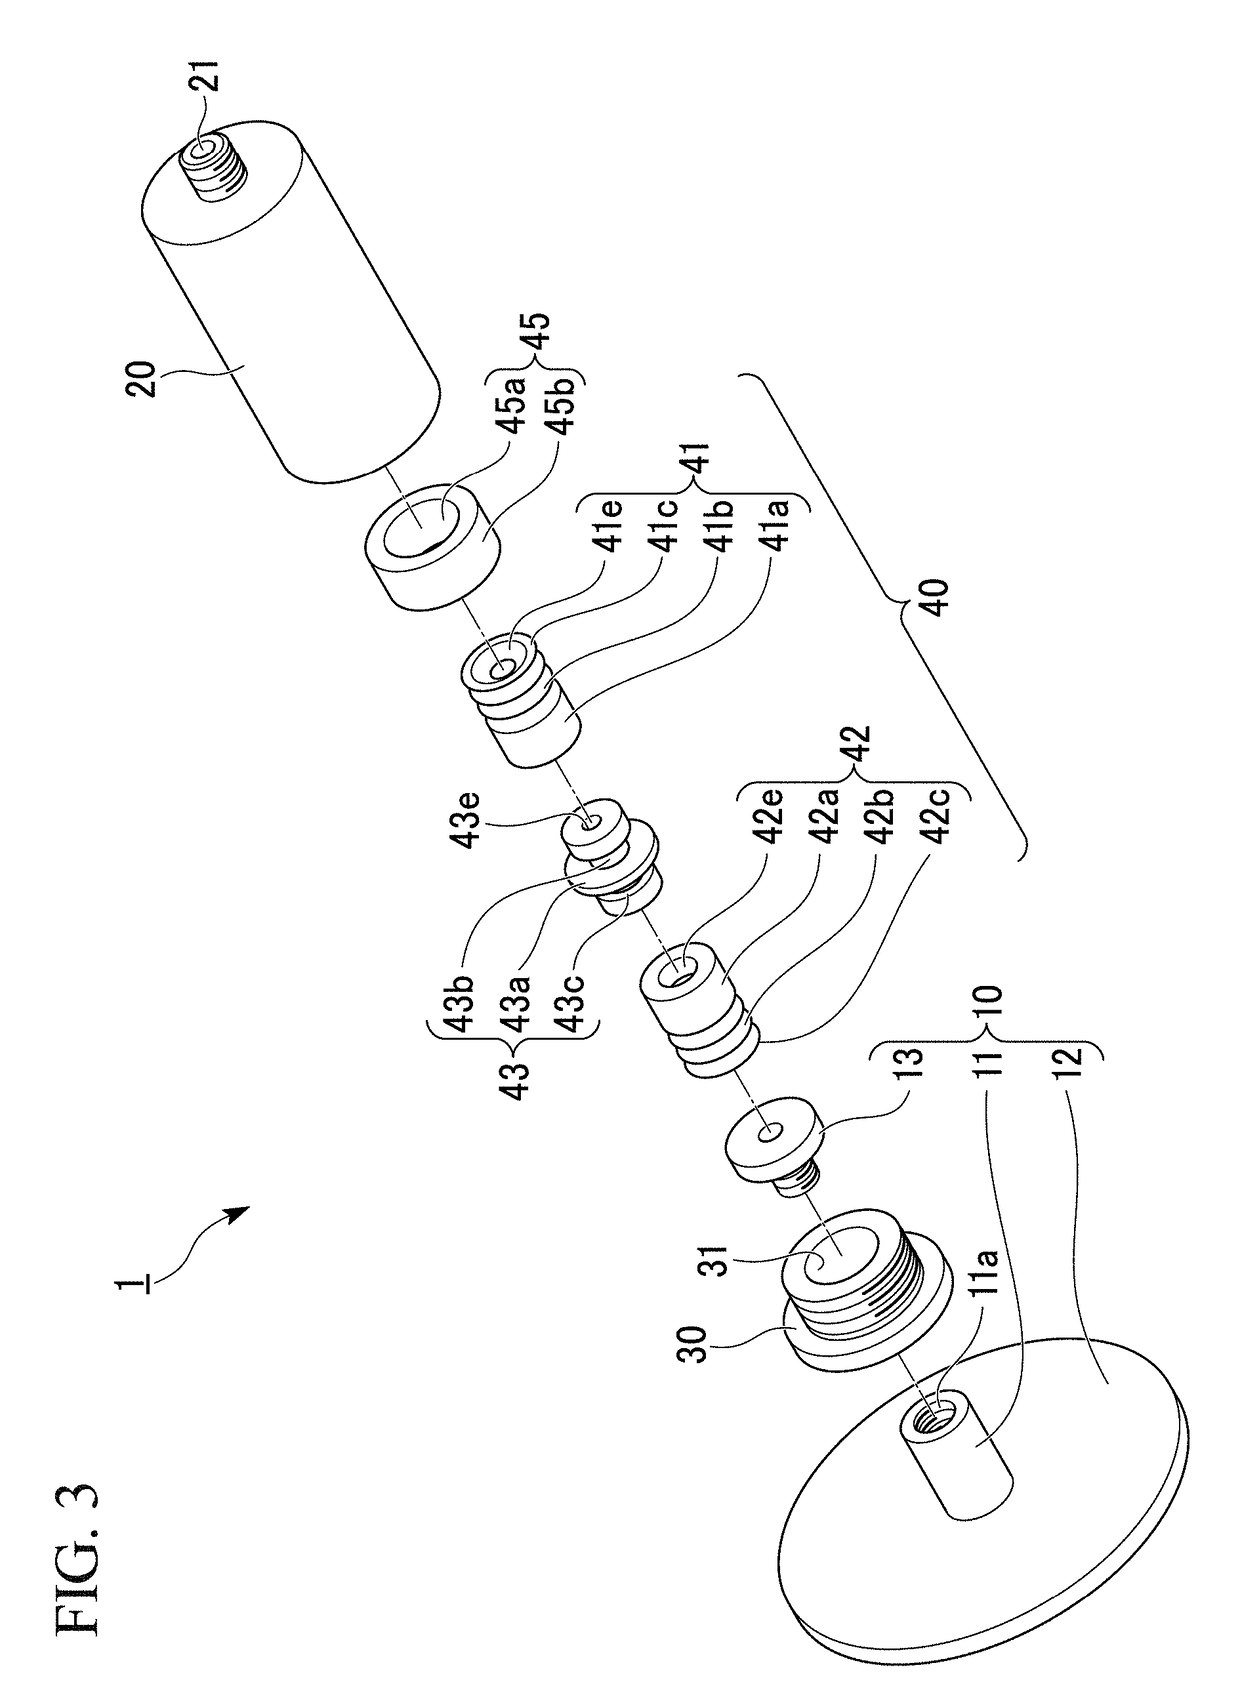 Holding nozzle, holding head and transportation apparatus